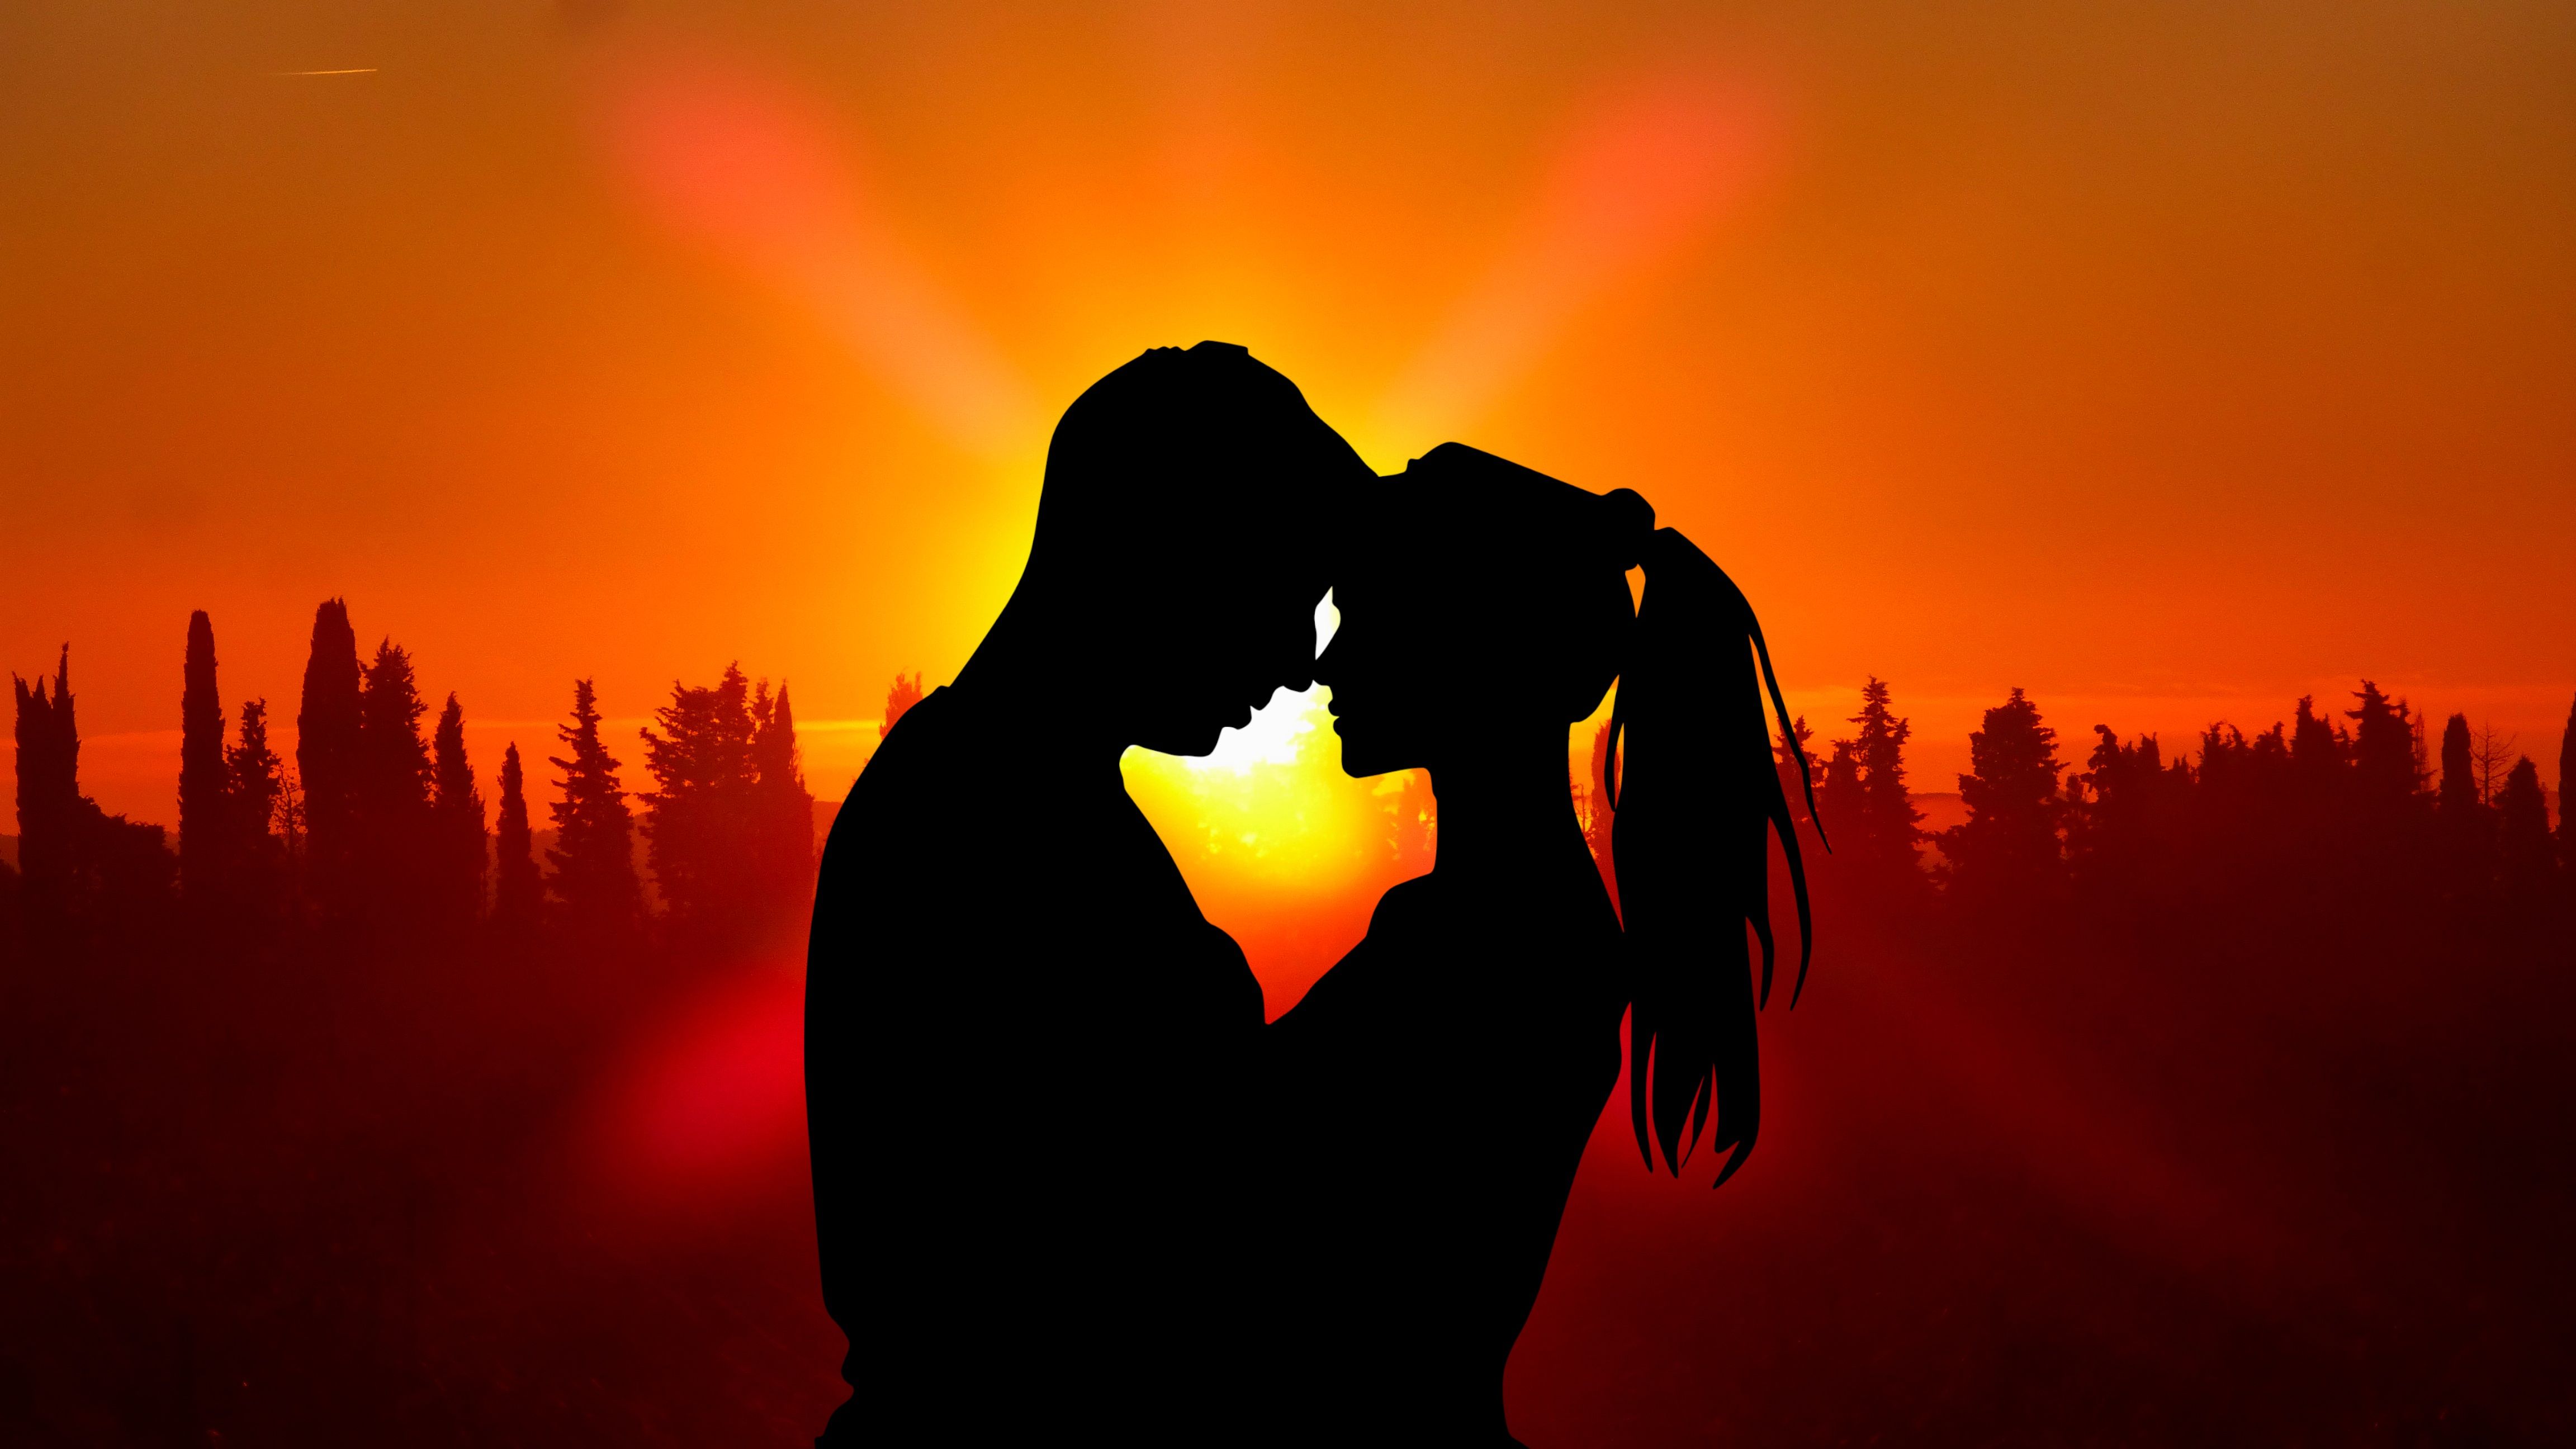 Sunset Couple Love Silhouette 5k 1024x768 Resolution HD 4k Wallpaper, Image, Background, Photo and Picture